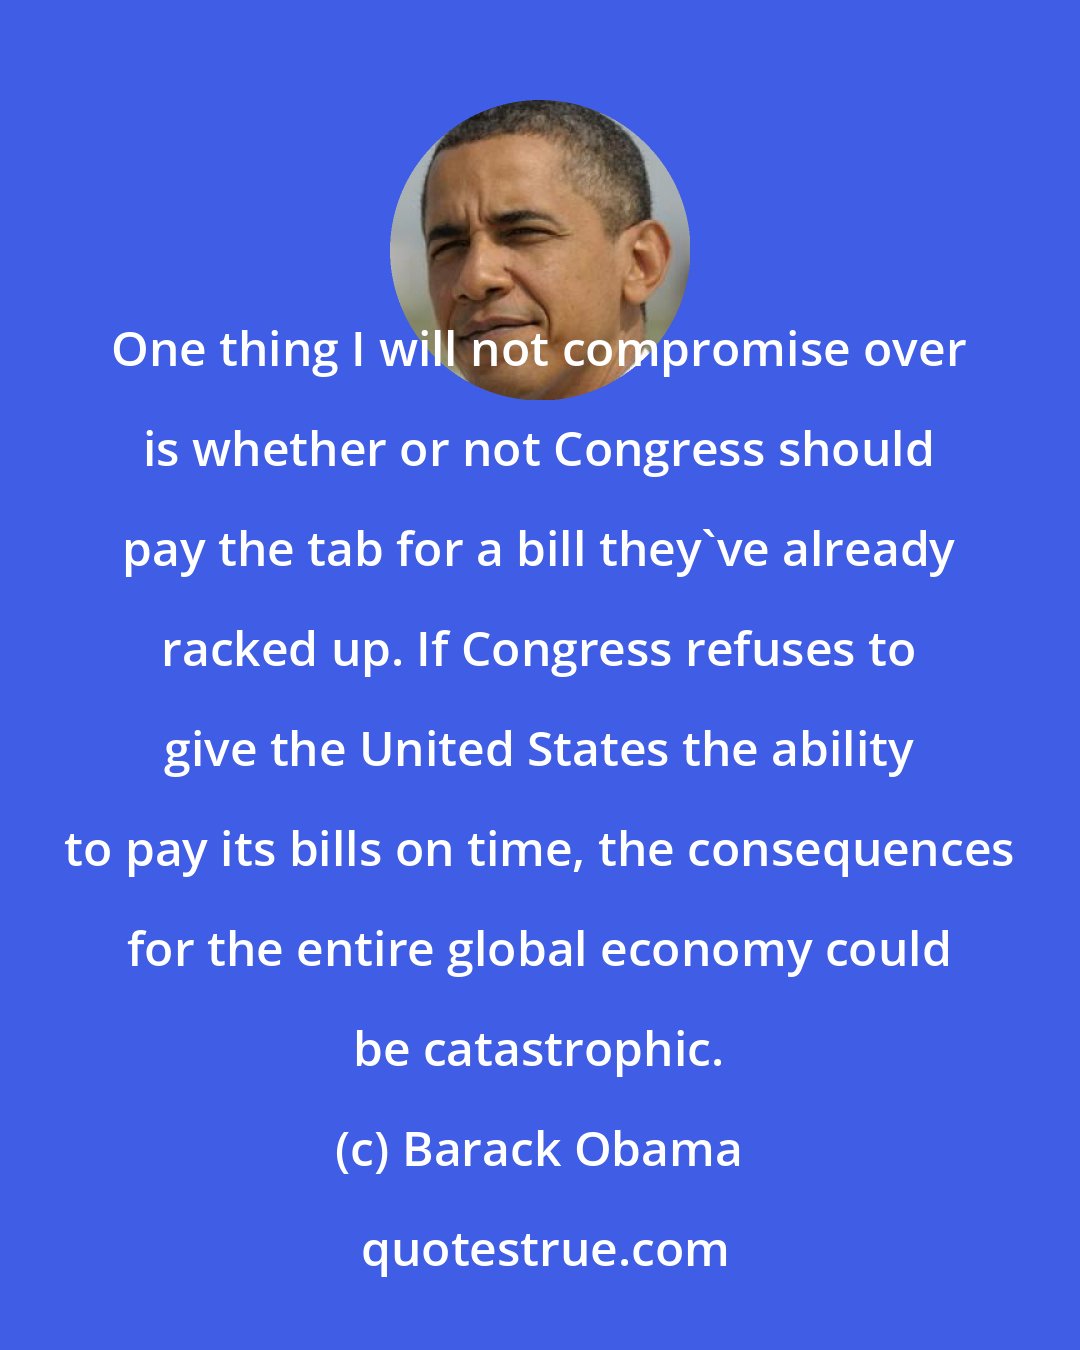 Barack Obama: One thing I will not compromise over is whether or not Congress should pay the tab for a bill they've already racked up. If Congress refuses to give the United States the ability to pay its bills on time, the consequences for the entire global economy could be catastrophic.